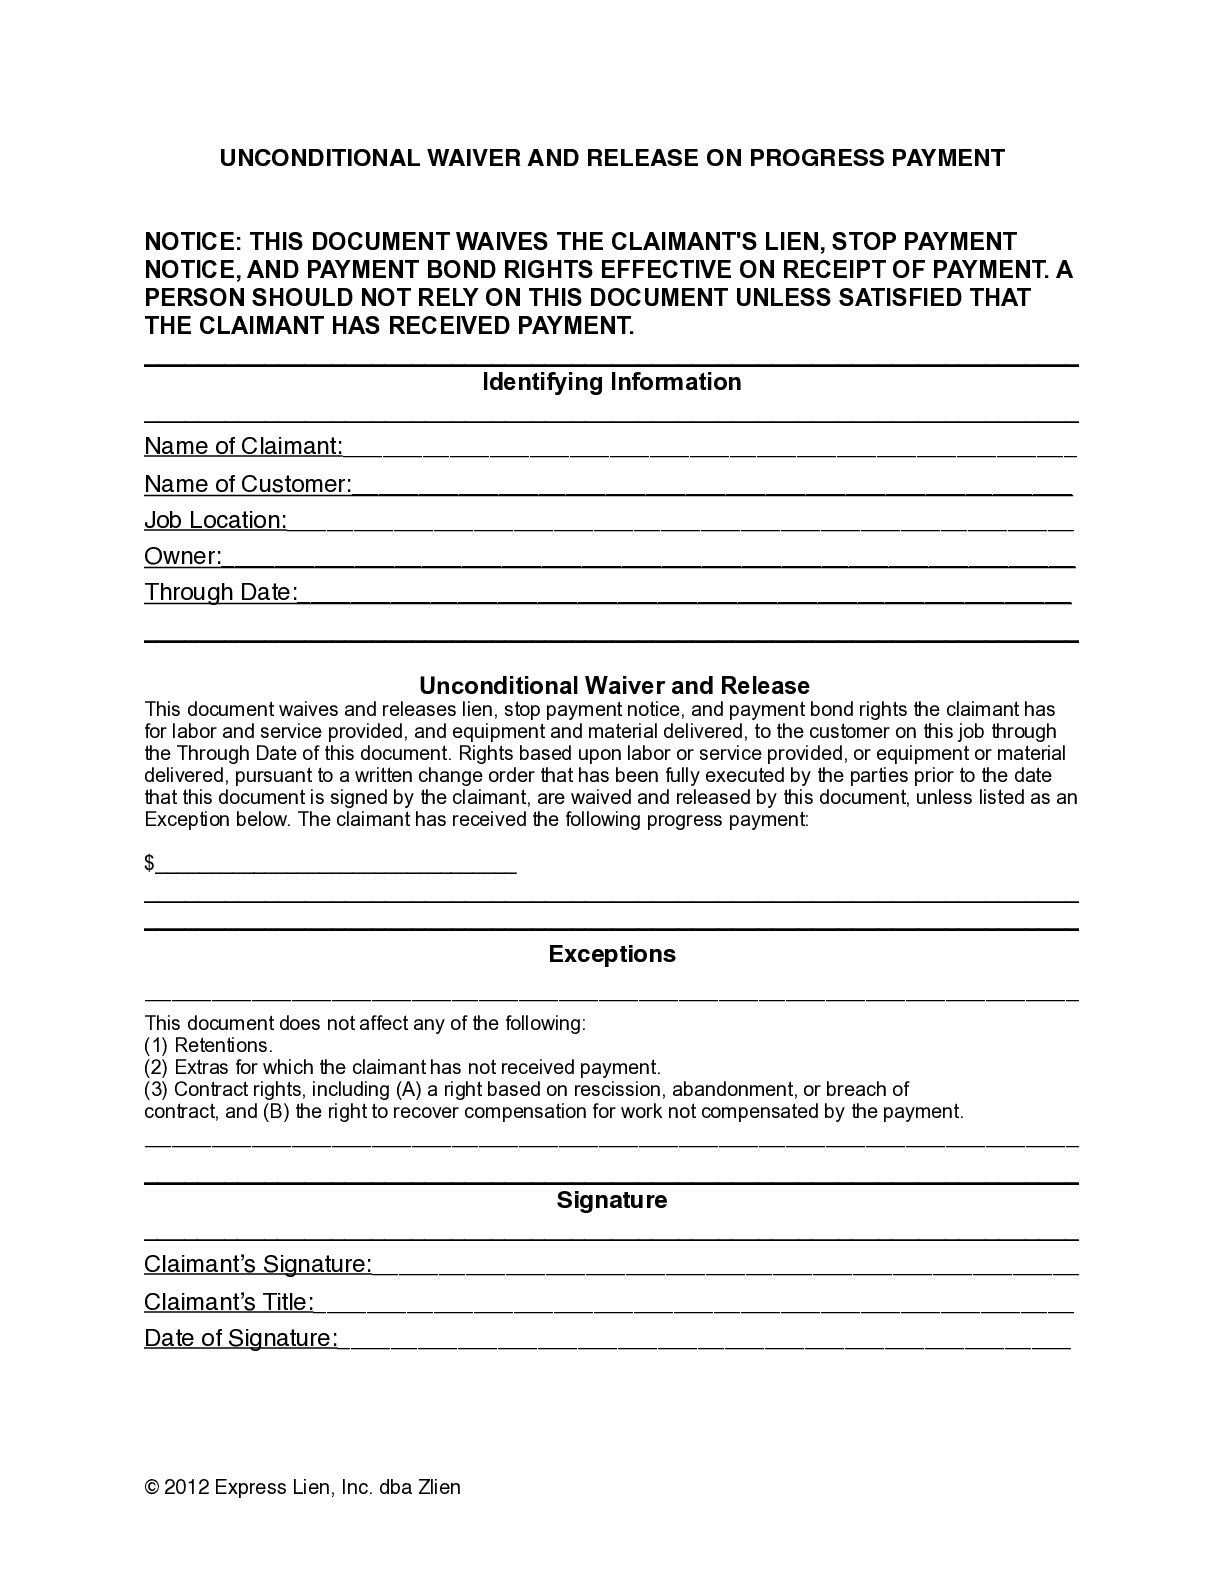 Iowa Partial Unconditional Lien Waiver Form - free from